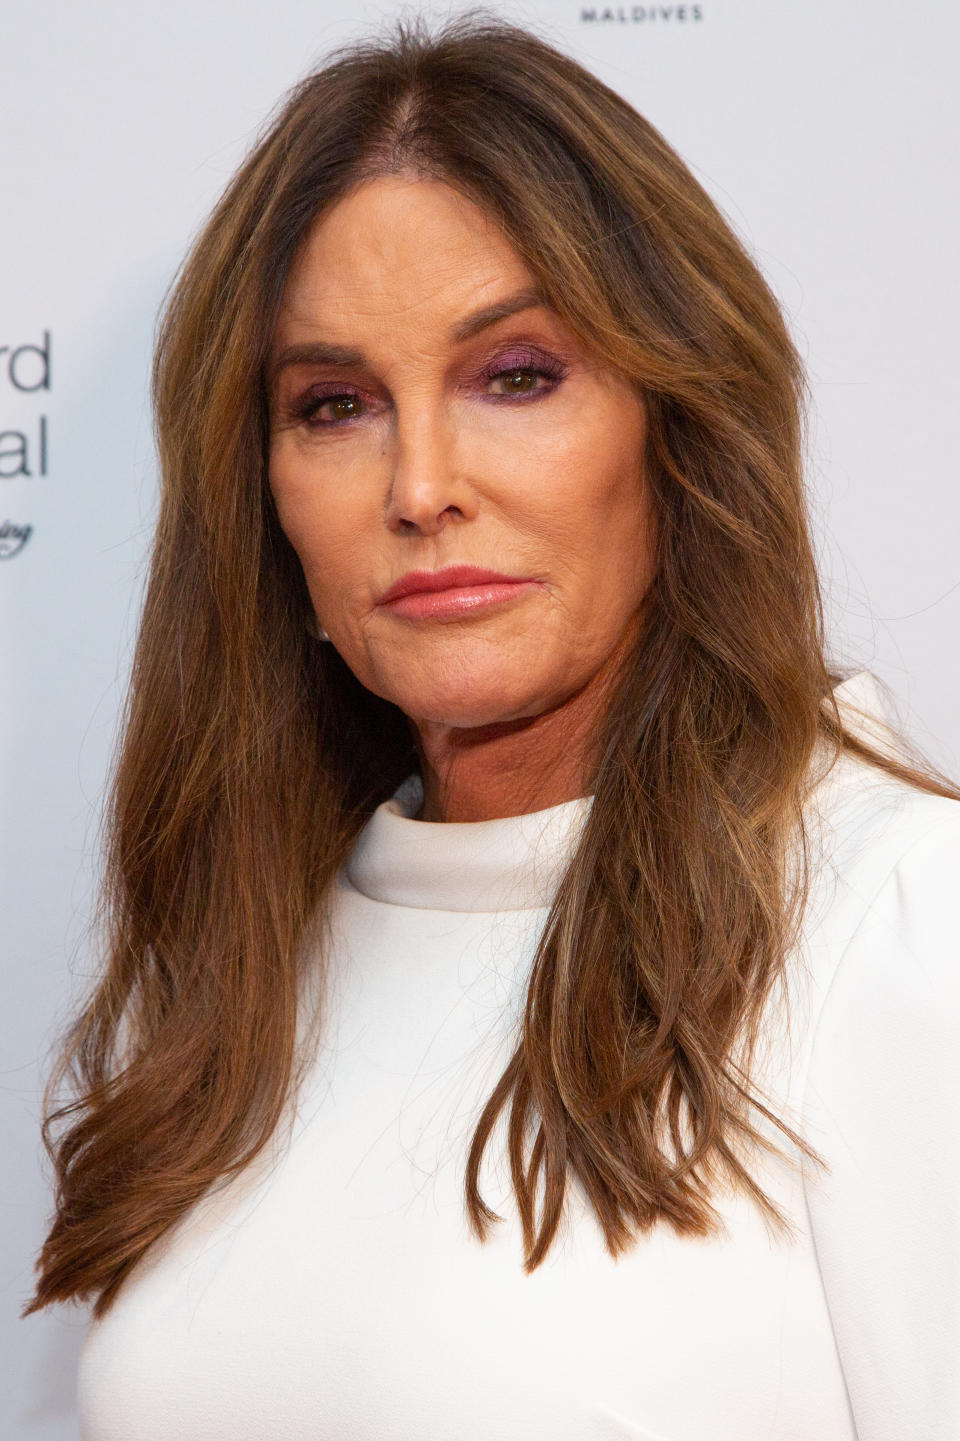 Caitlyn Jenner is starring in U.K. reality show I'm a Celebrity...Get Me Out of Here. (Photo: Gabriel Olsen/Getty Images)